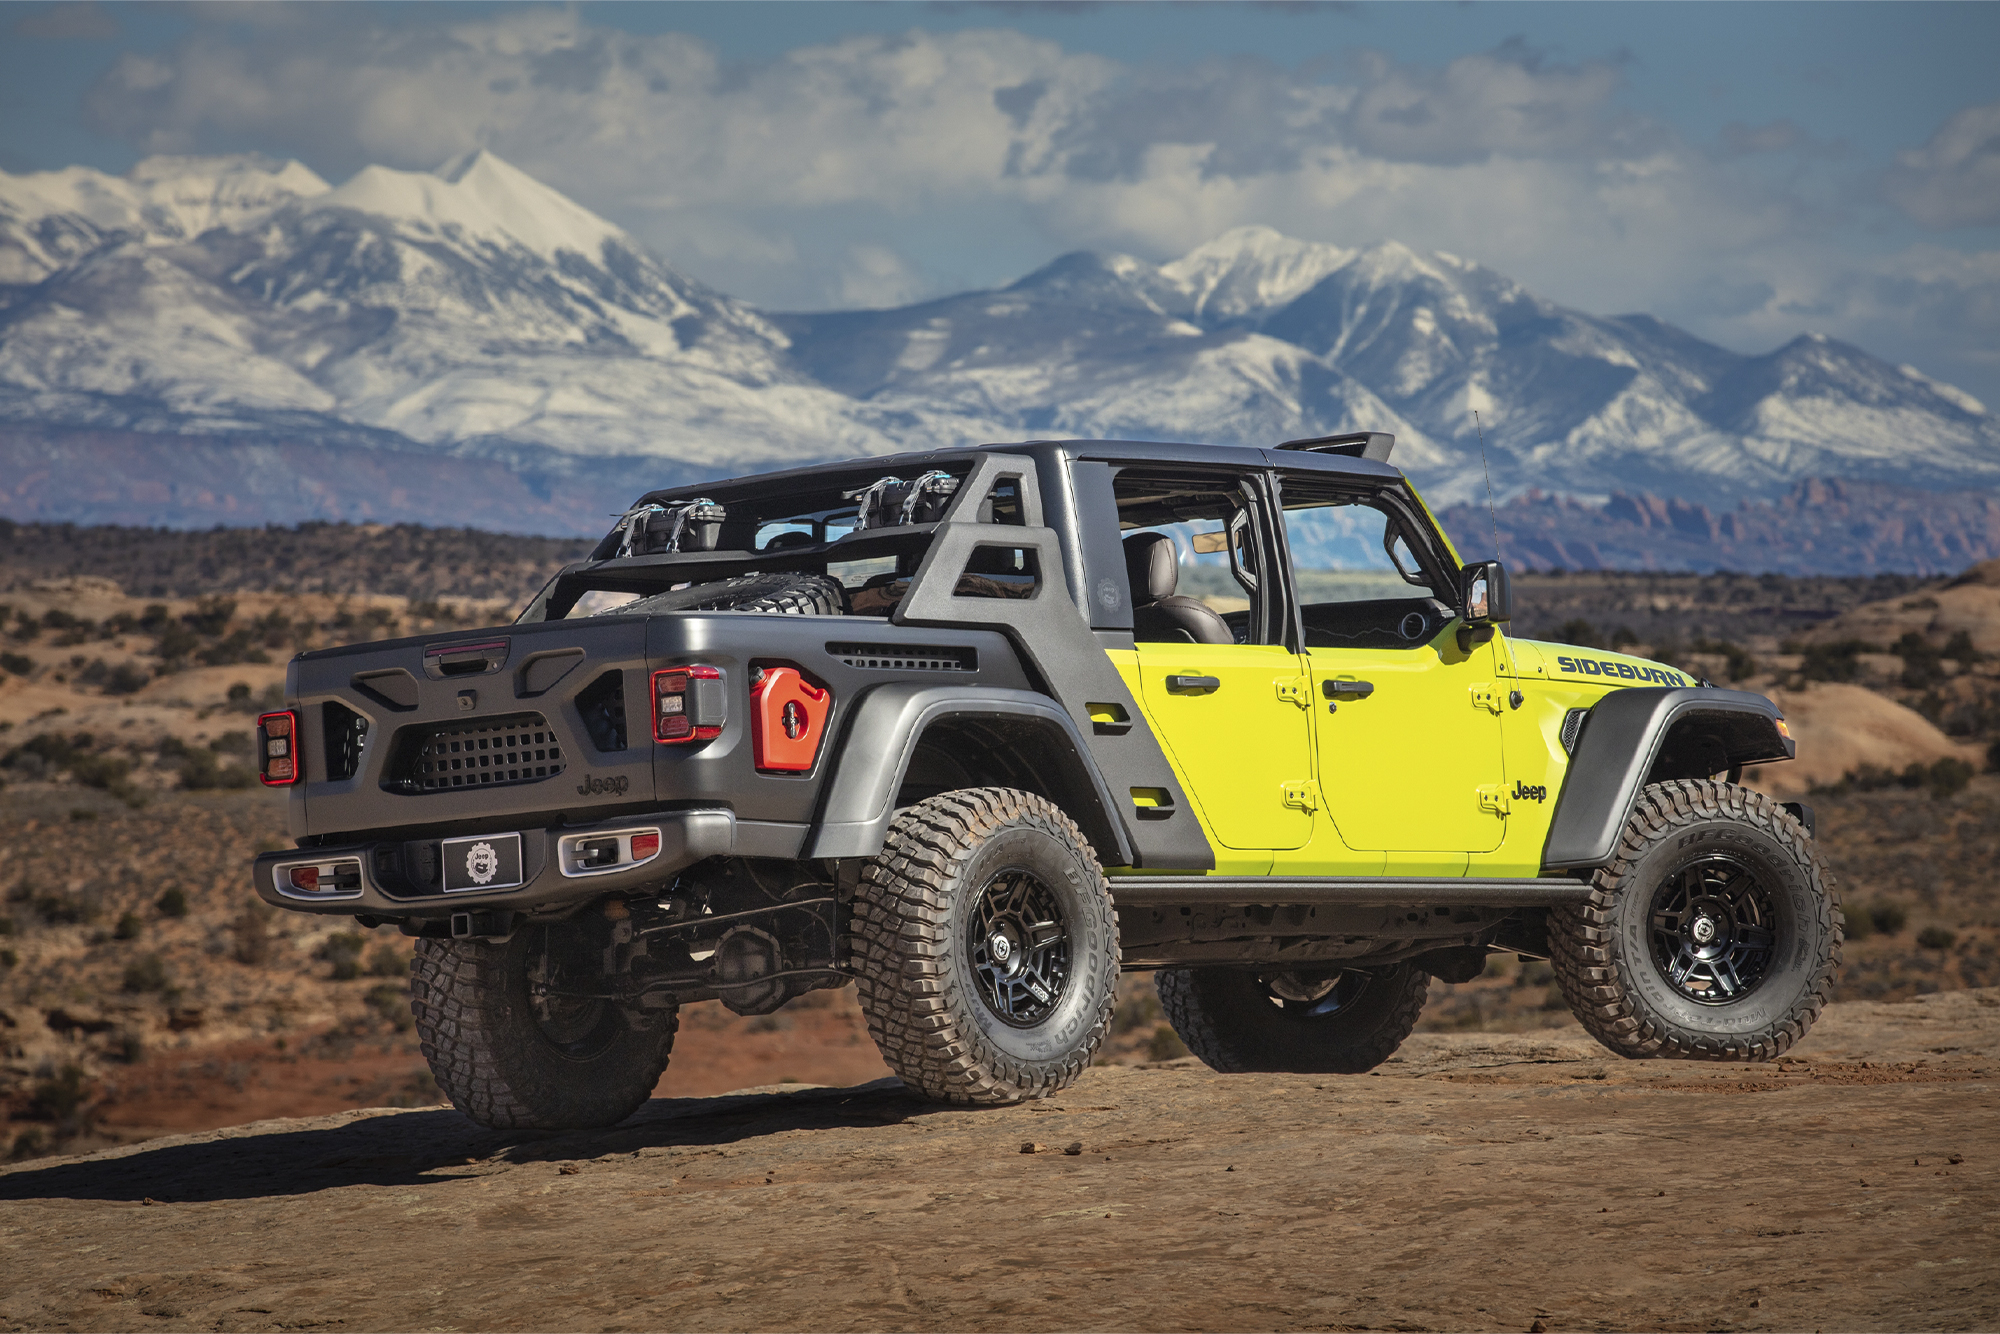 Jeep Gladiator Rubicon Sideburn Concept side and back view